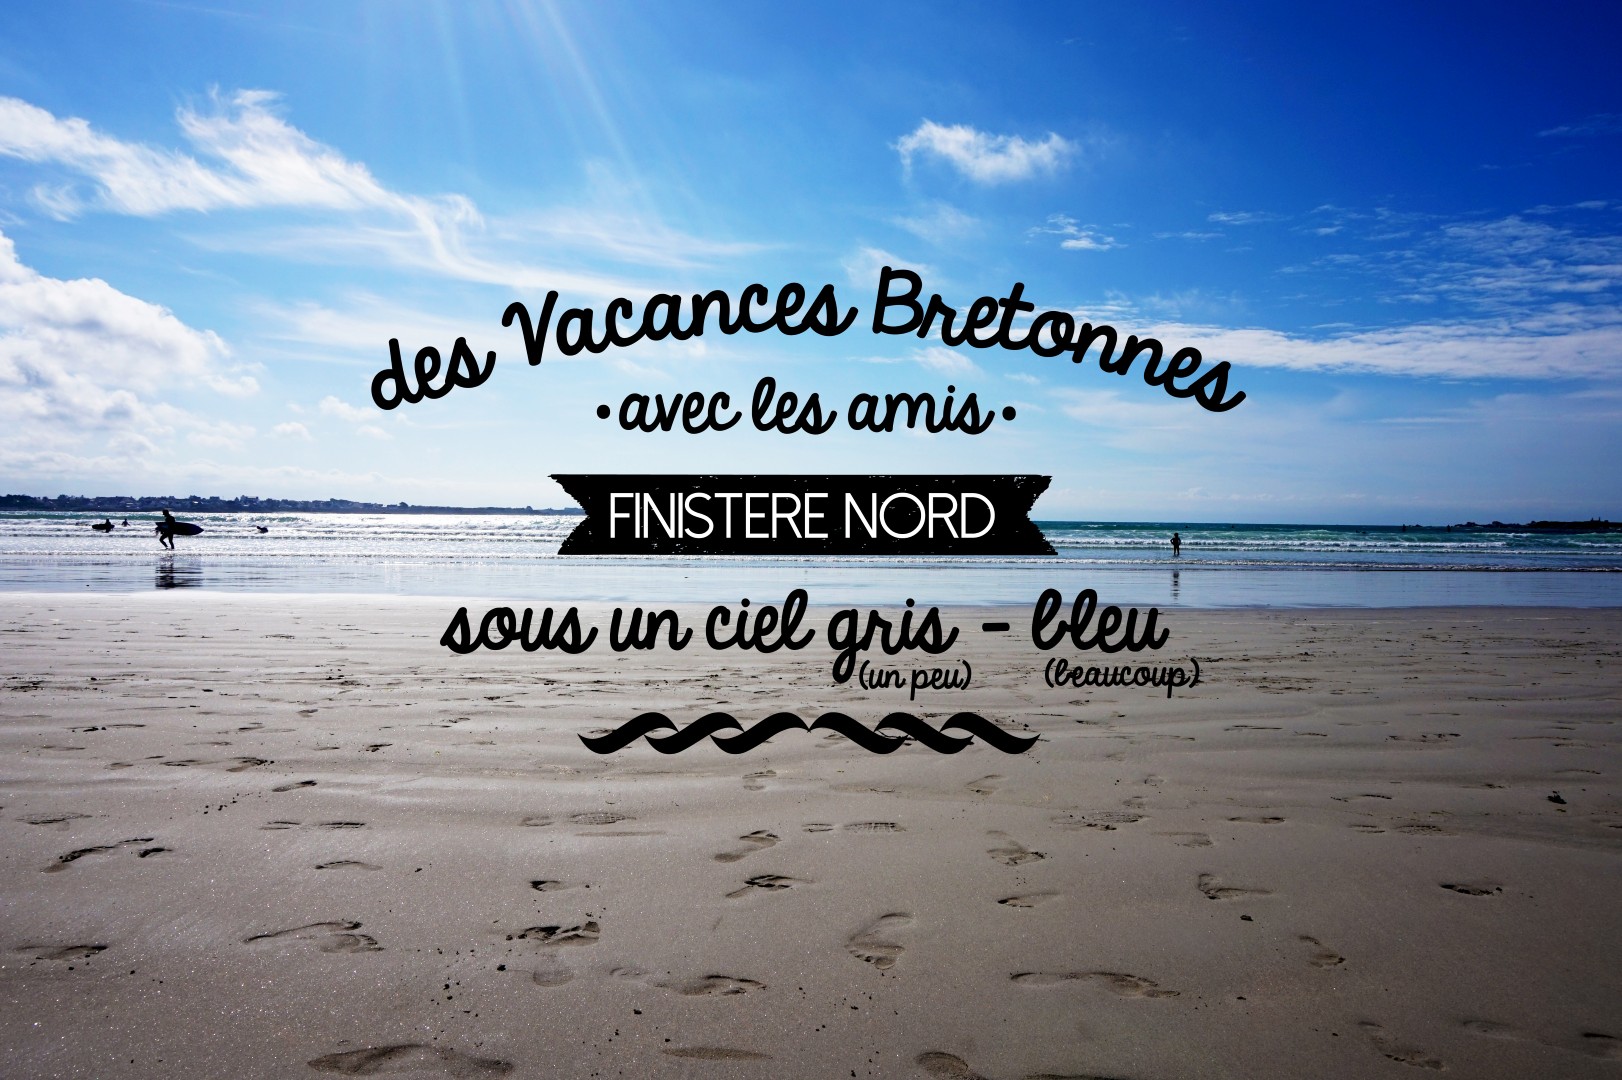 20150608_vacances_finistere_nord (Large)